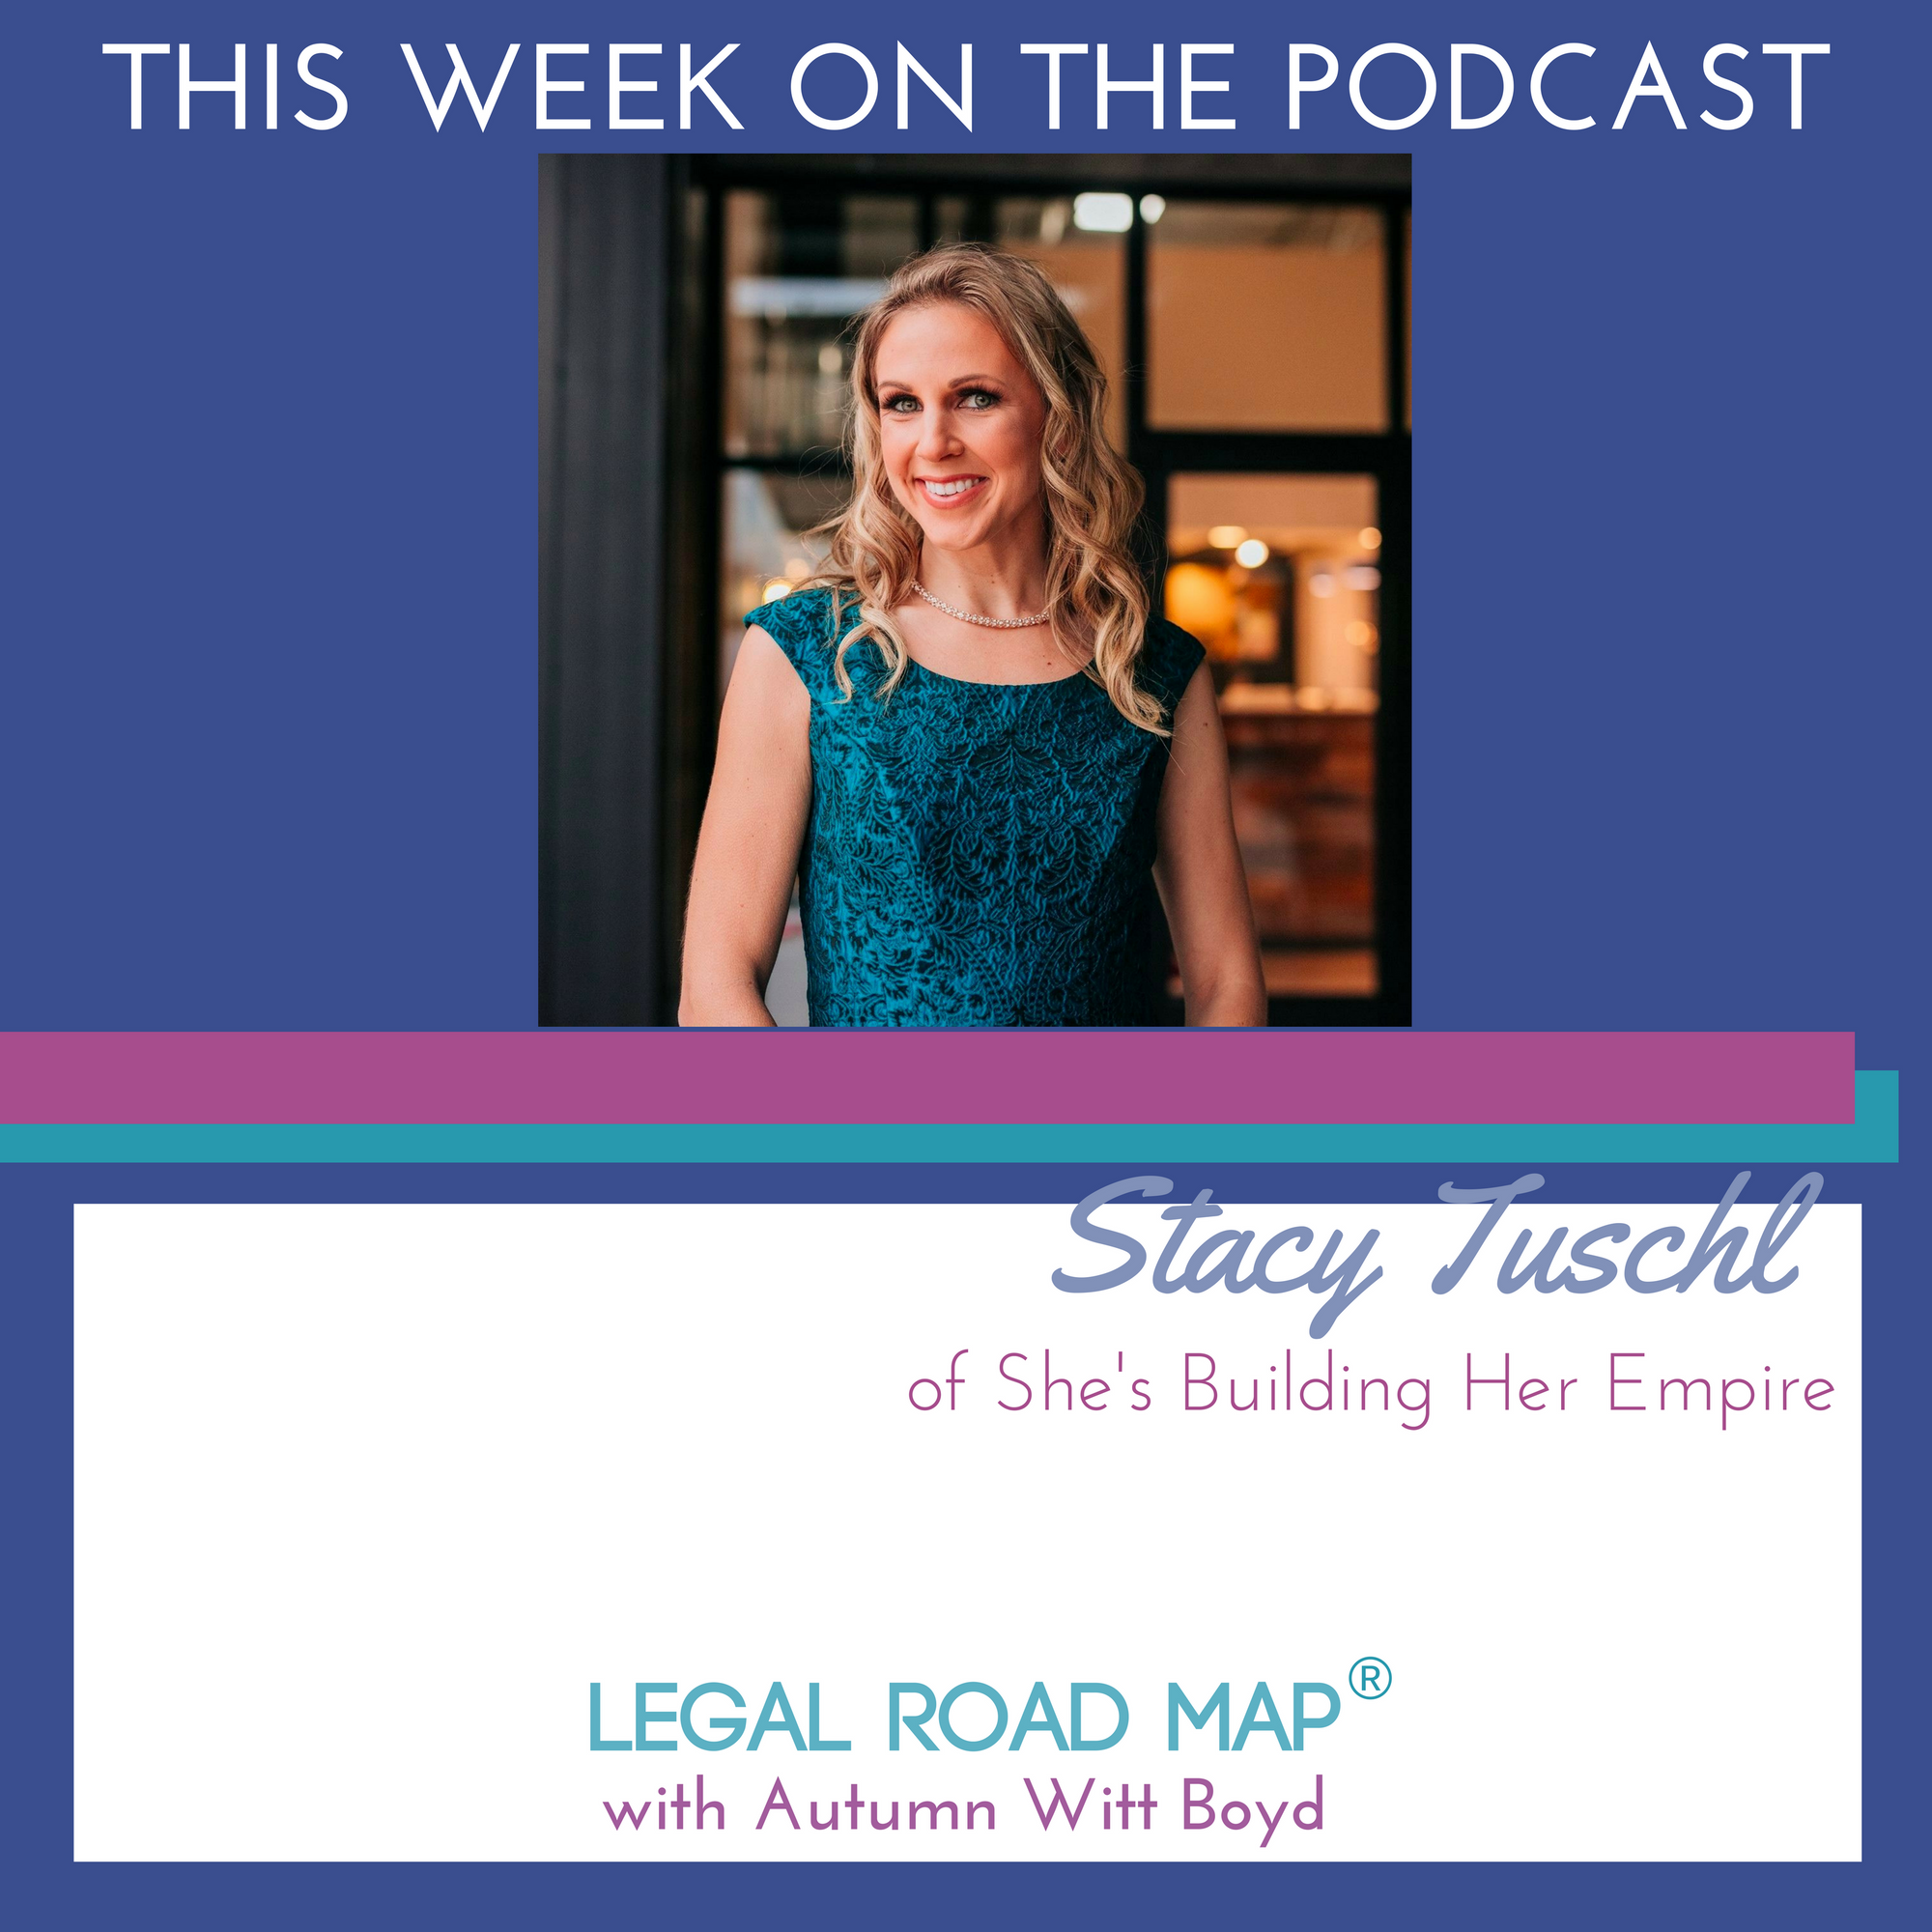 Stacy Tuschl on building empires with legal help (Legal Road Map® Podcast S2E20)